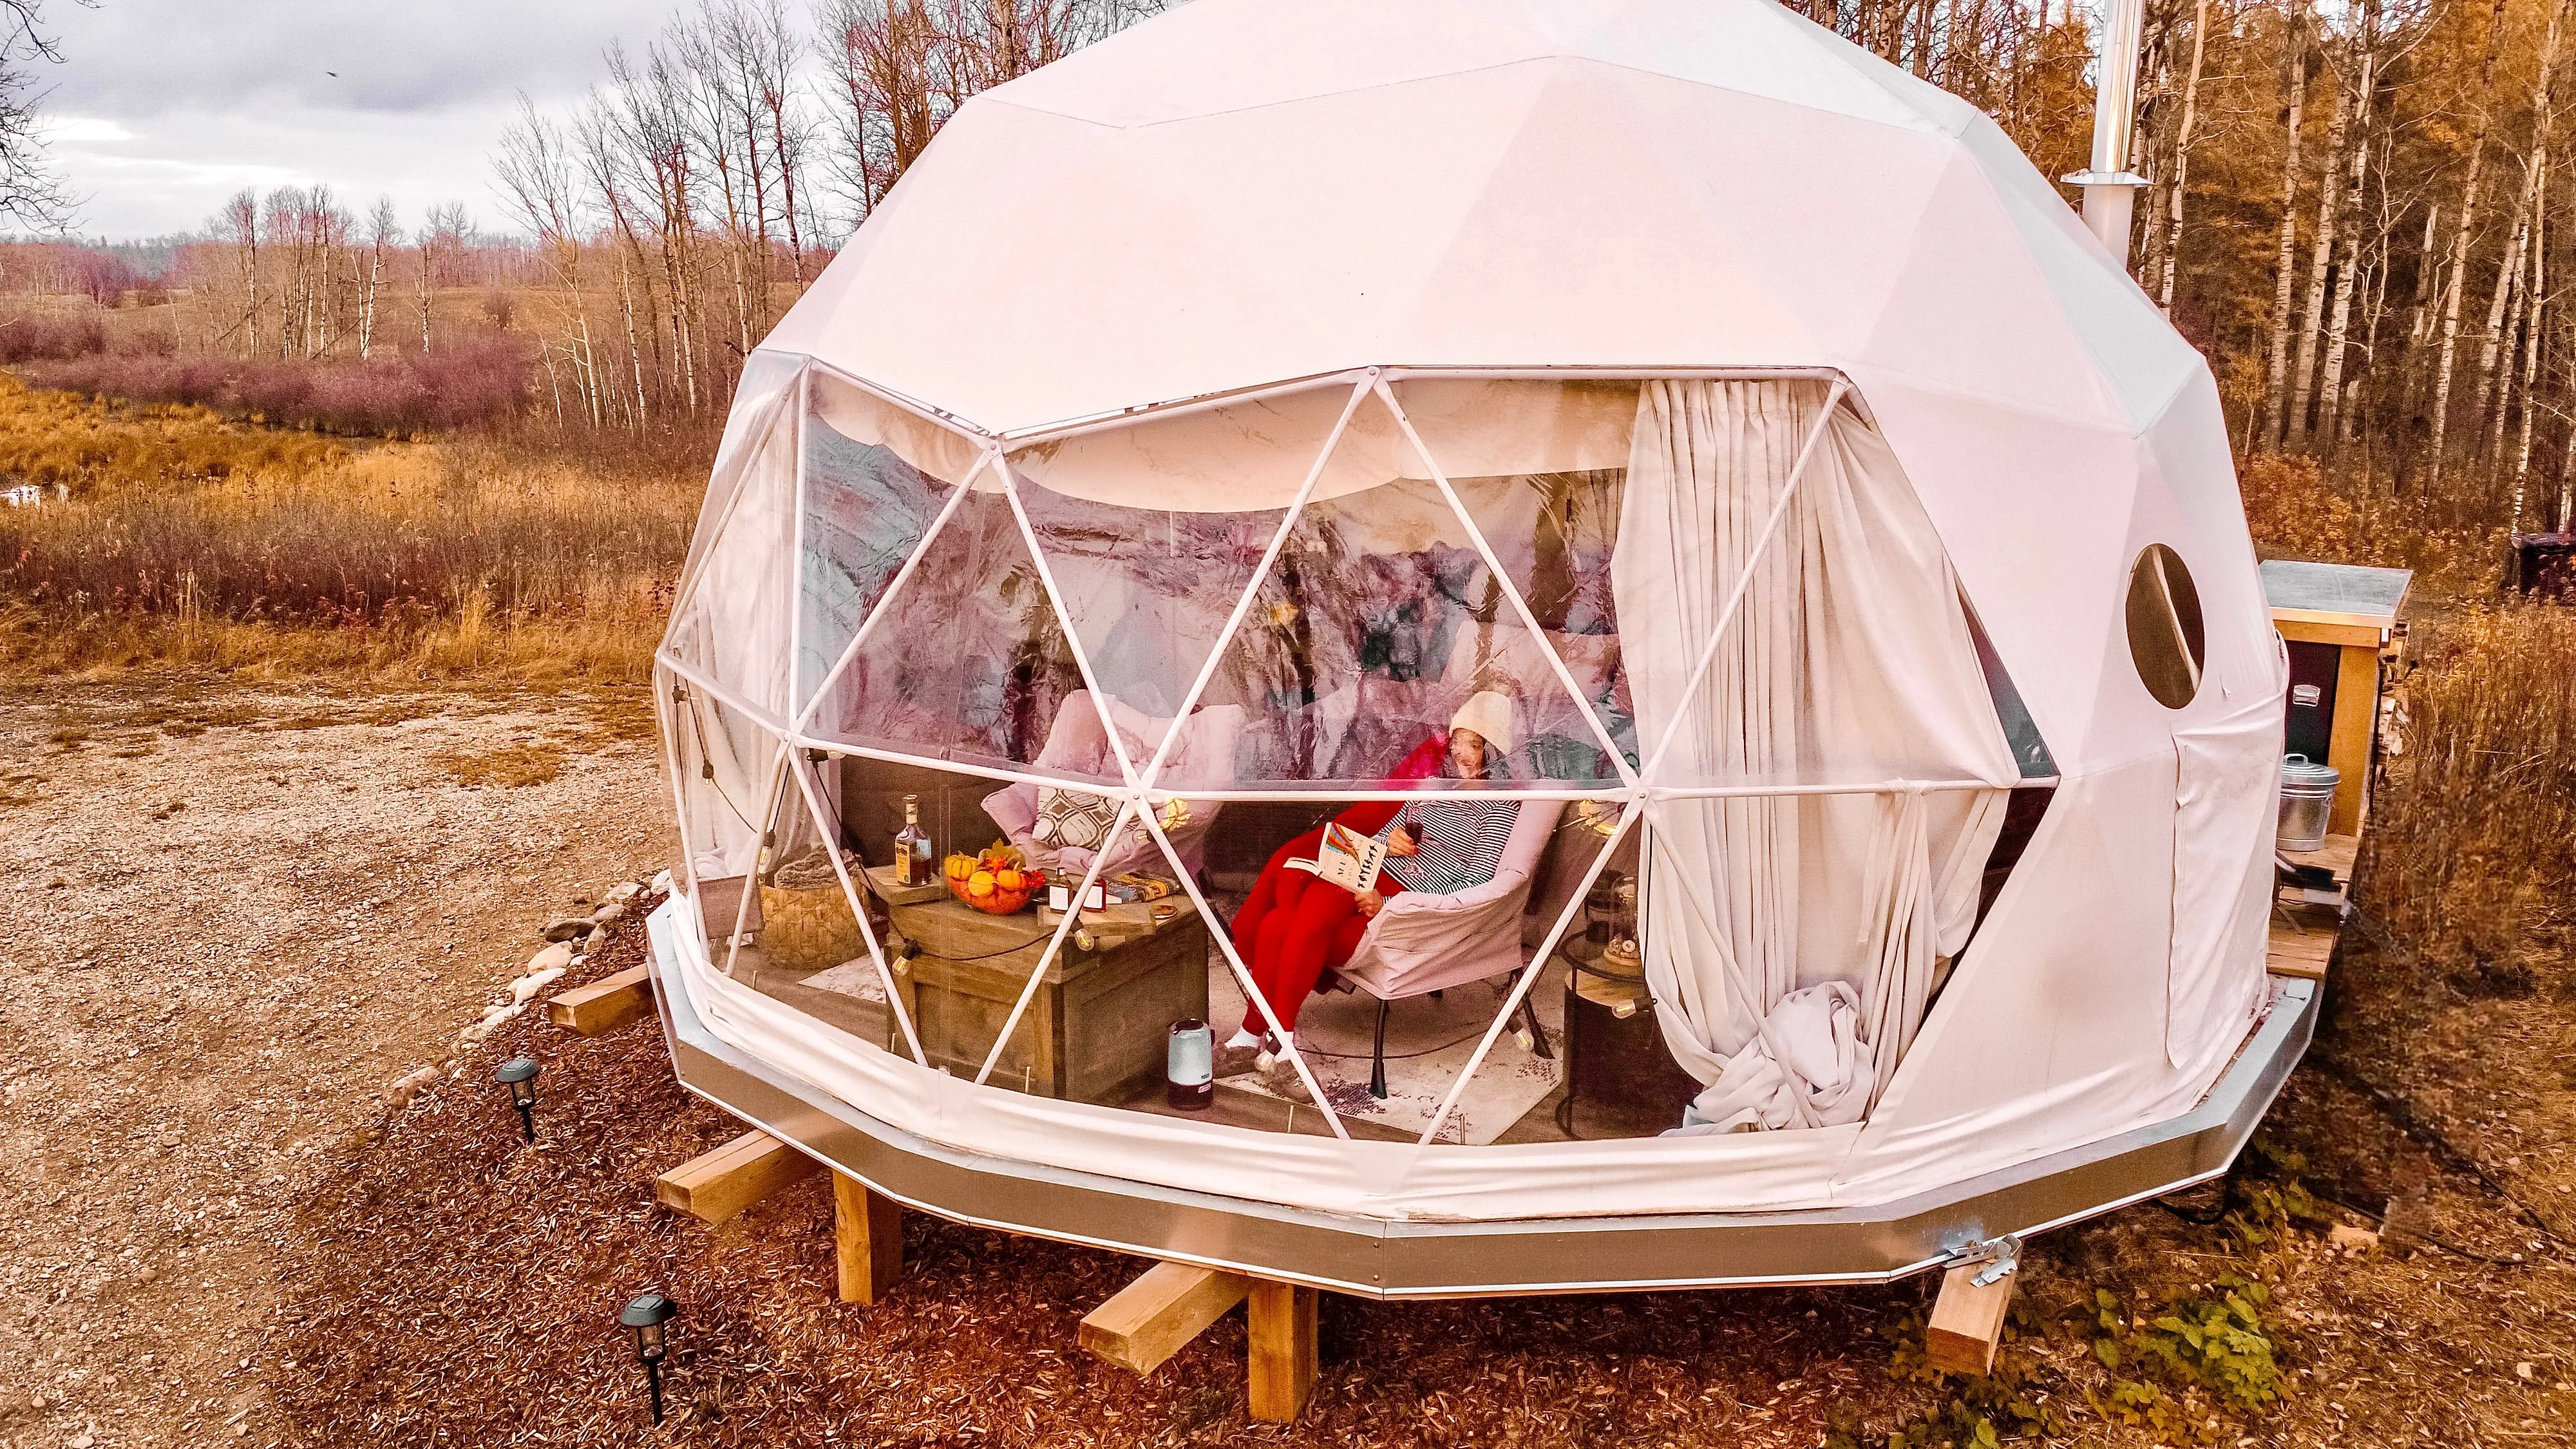 exterior shot of ignis dome with forest in the background. A woman is enjoying a glass of wine inside the dome while reading a book